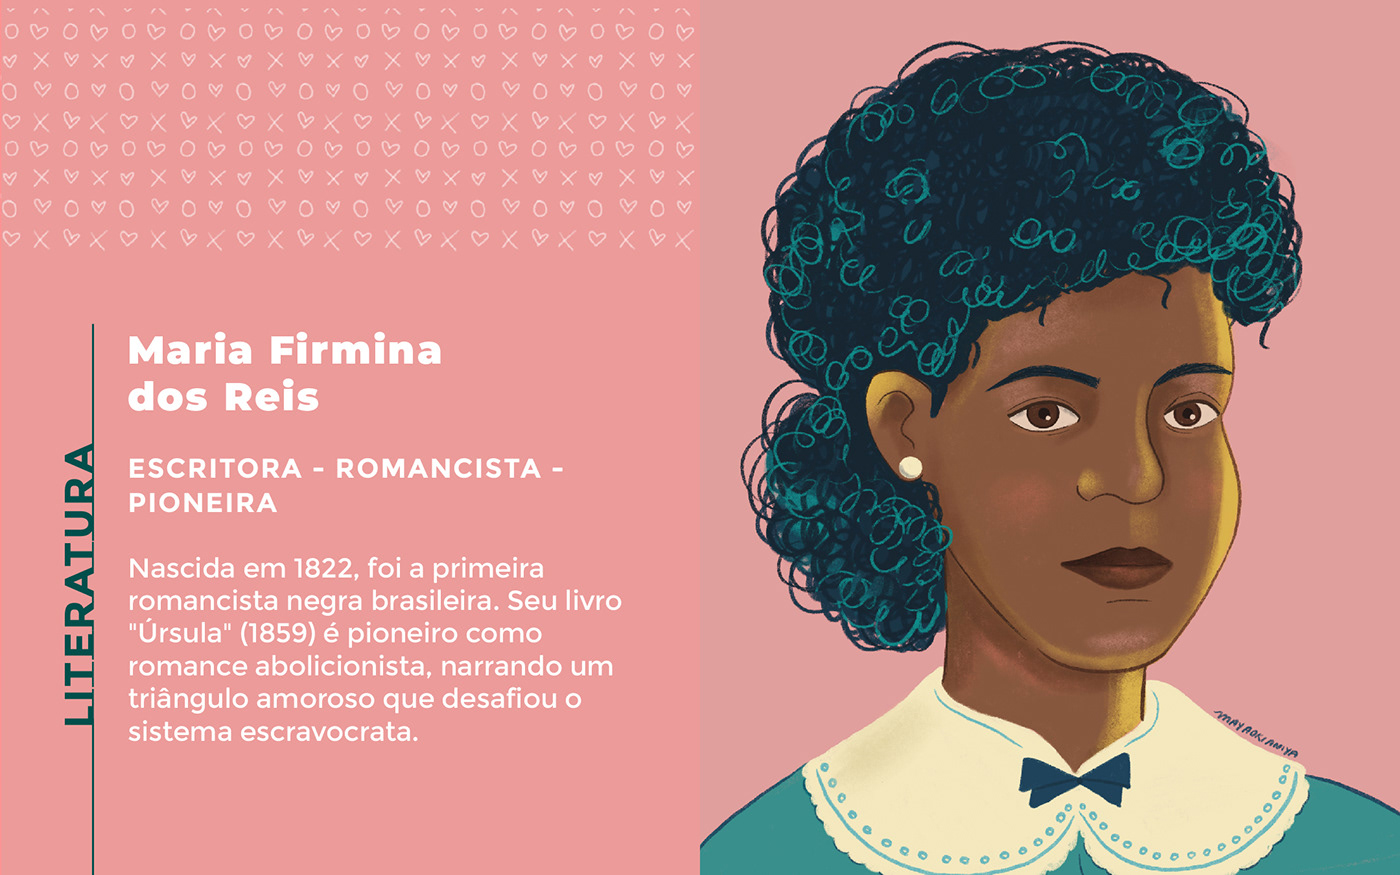 An illustrated portrait of Maria Firmina dos Reis one of the first women writers in Brazil.
